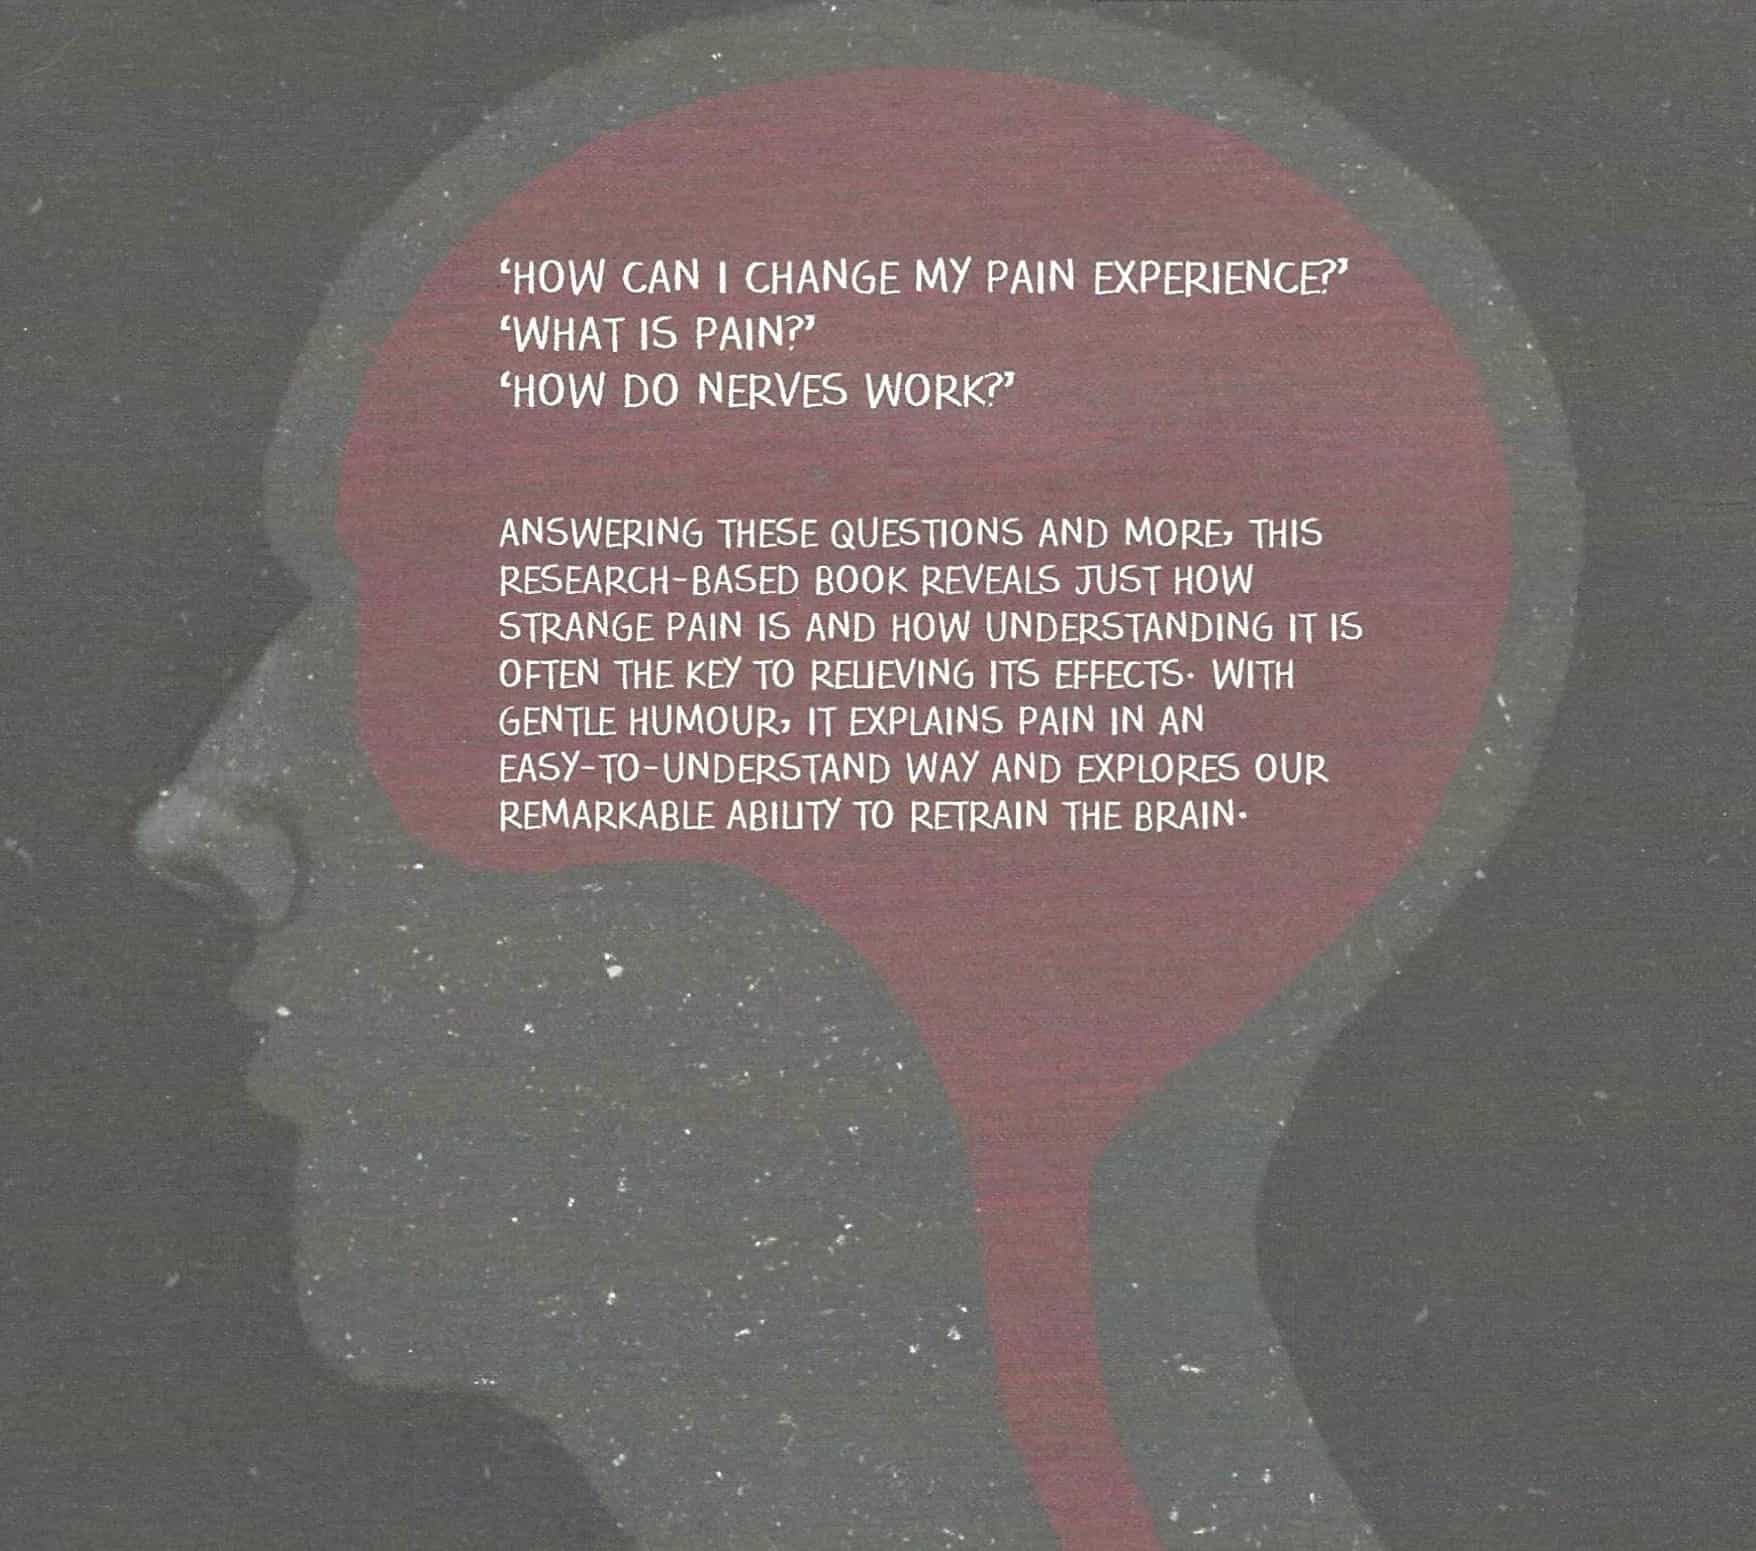 Side view of a head, within the brain text reads "how can i change my pain experience? what is pain? how to nerves work? Answering thesequestions and more, this reserach-based book reveals just how strange pain is and how understandng it is often thekey to relieving its effects. With gentle humour, it explains pain in an easy-to-understand way and explores our remarkable ability to retrain the brain." 